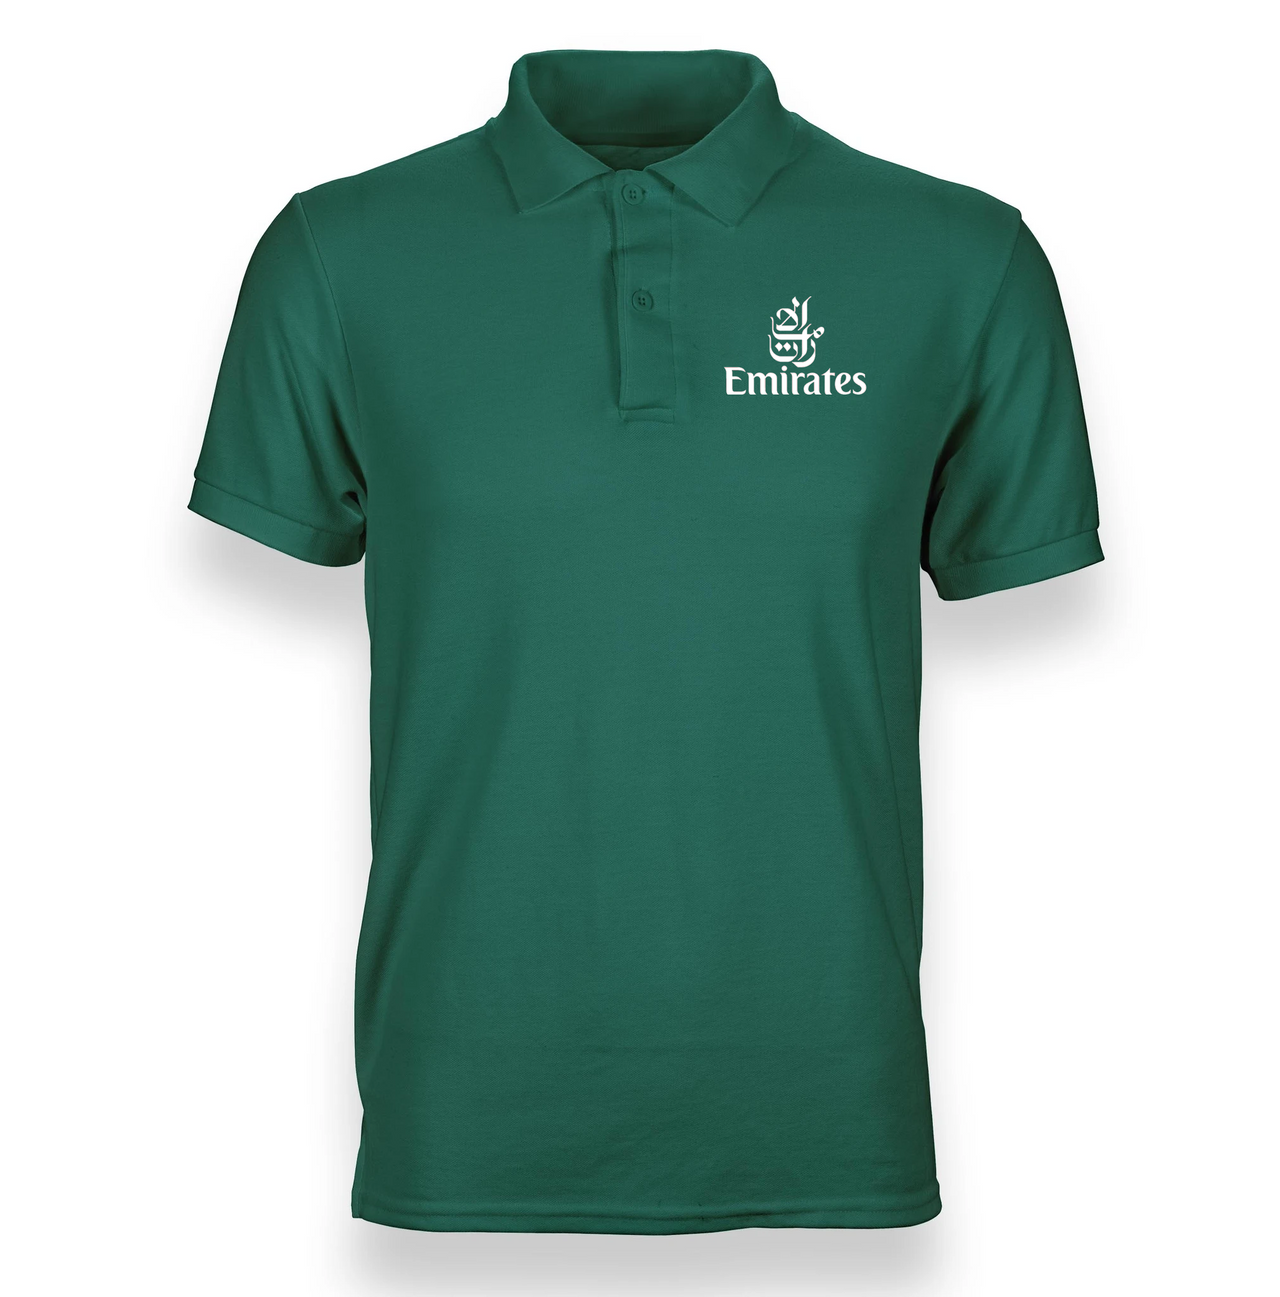 EMIRATES AIRLINES POLO T-SHIRT